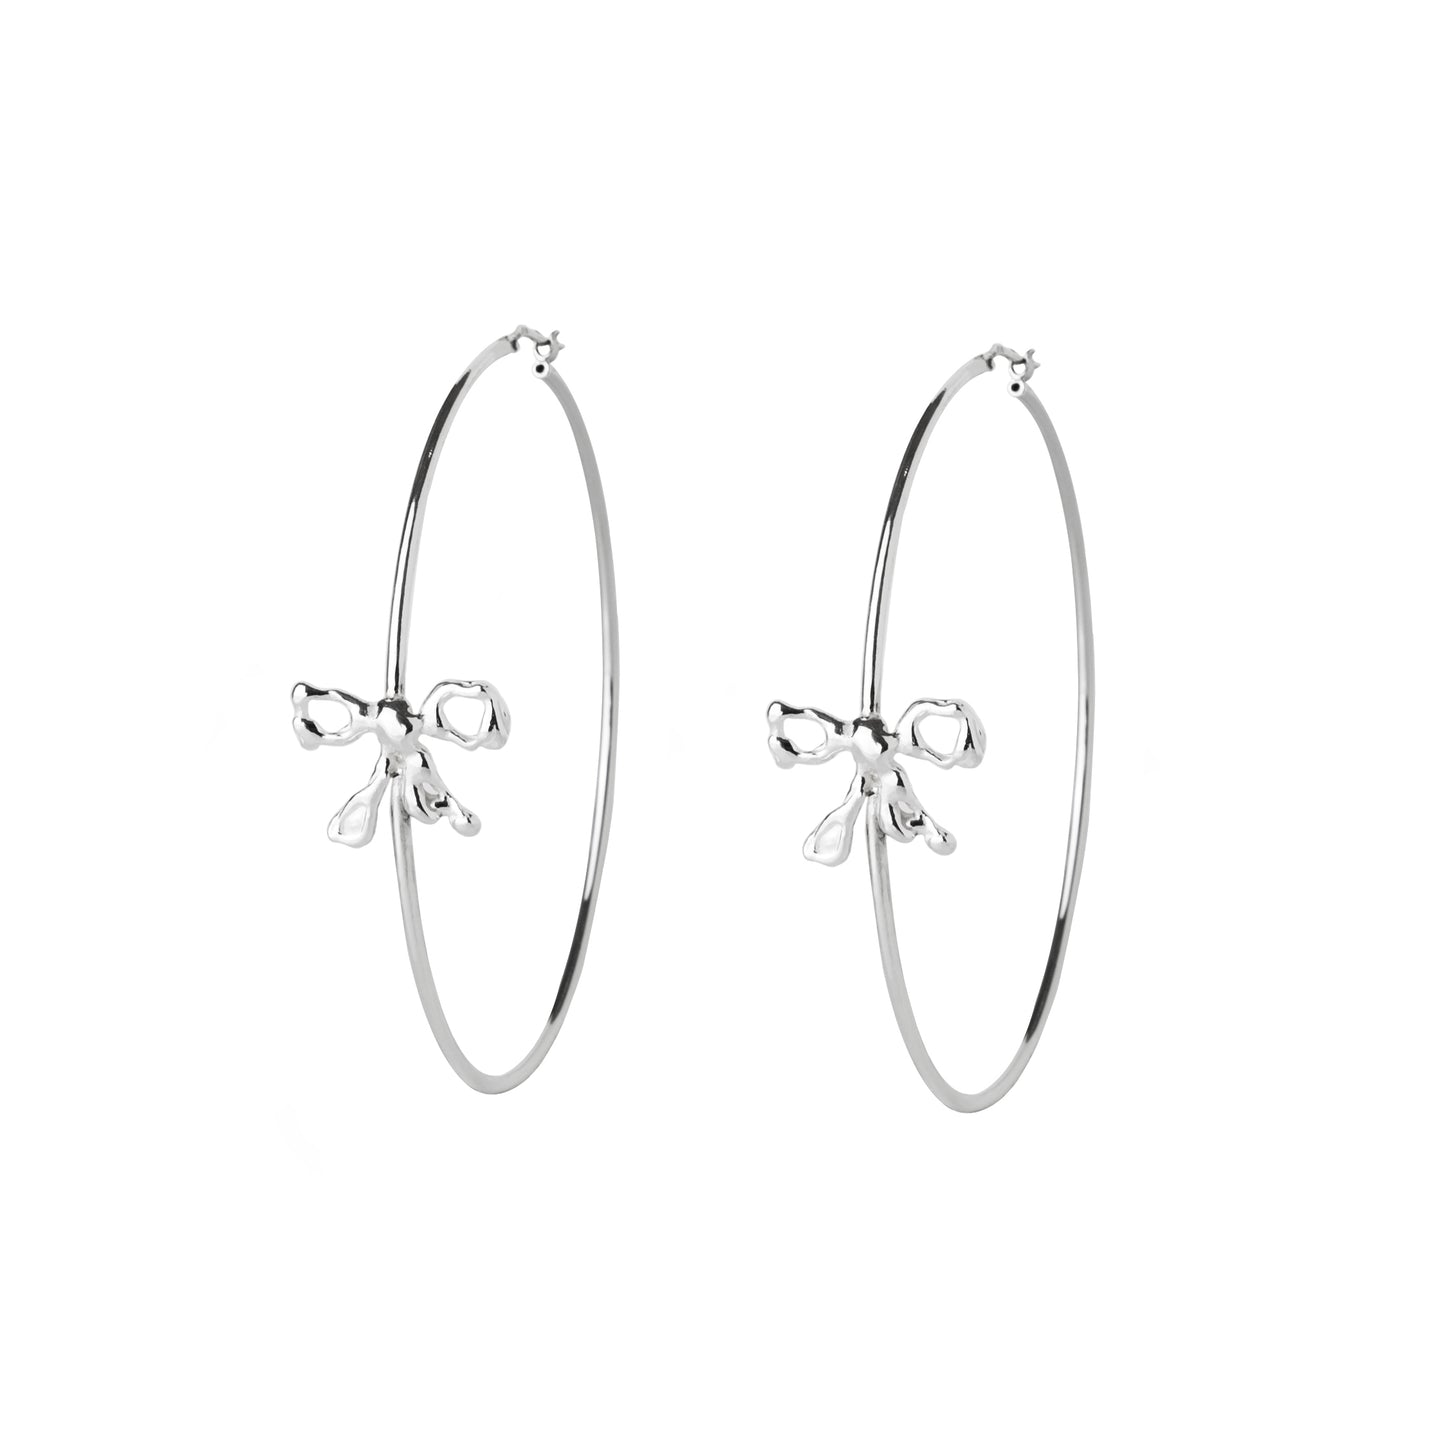 LIQUIFIED BOW Hoops